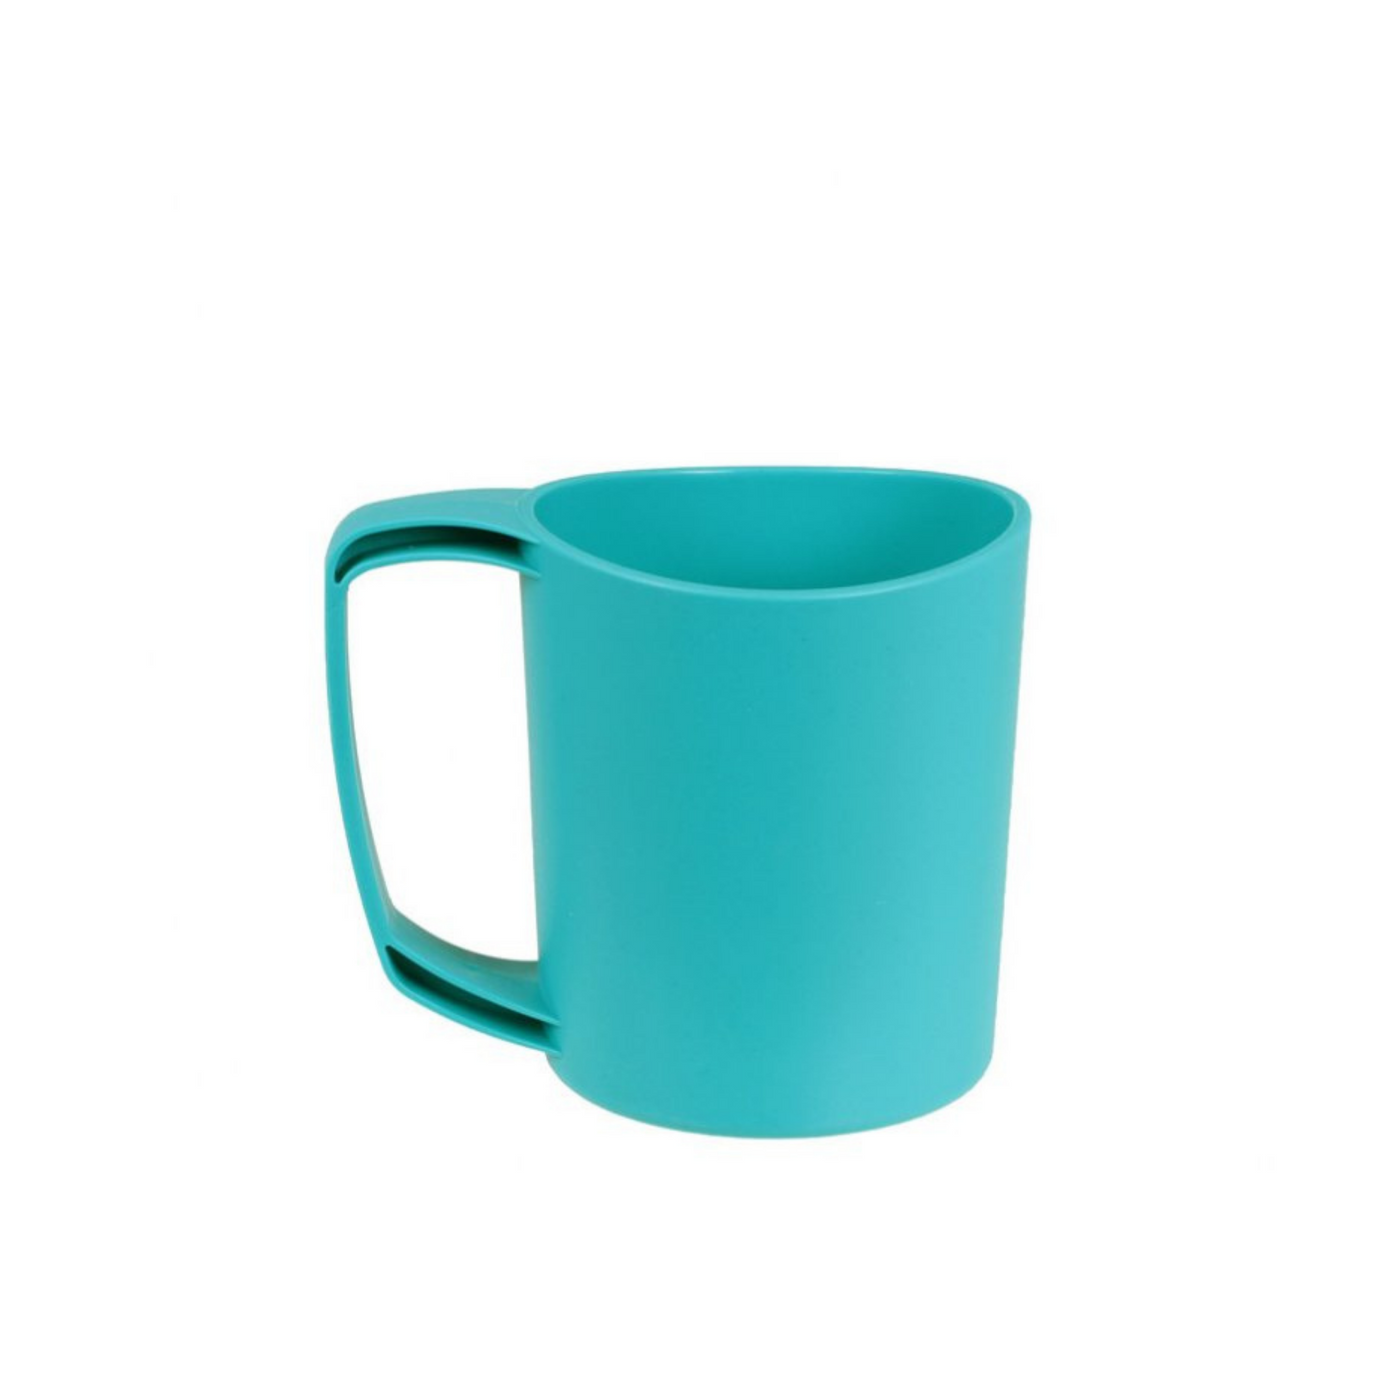 Lifeventure Ellipse Mug | Camping and Hiking Cookware | Further Faster Christchurch NZ #teal